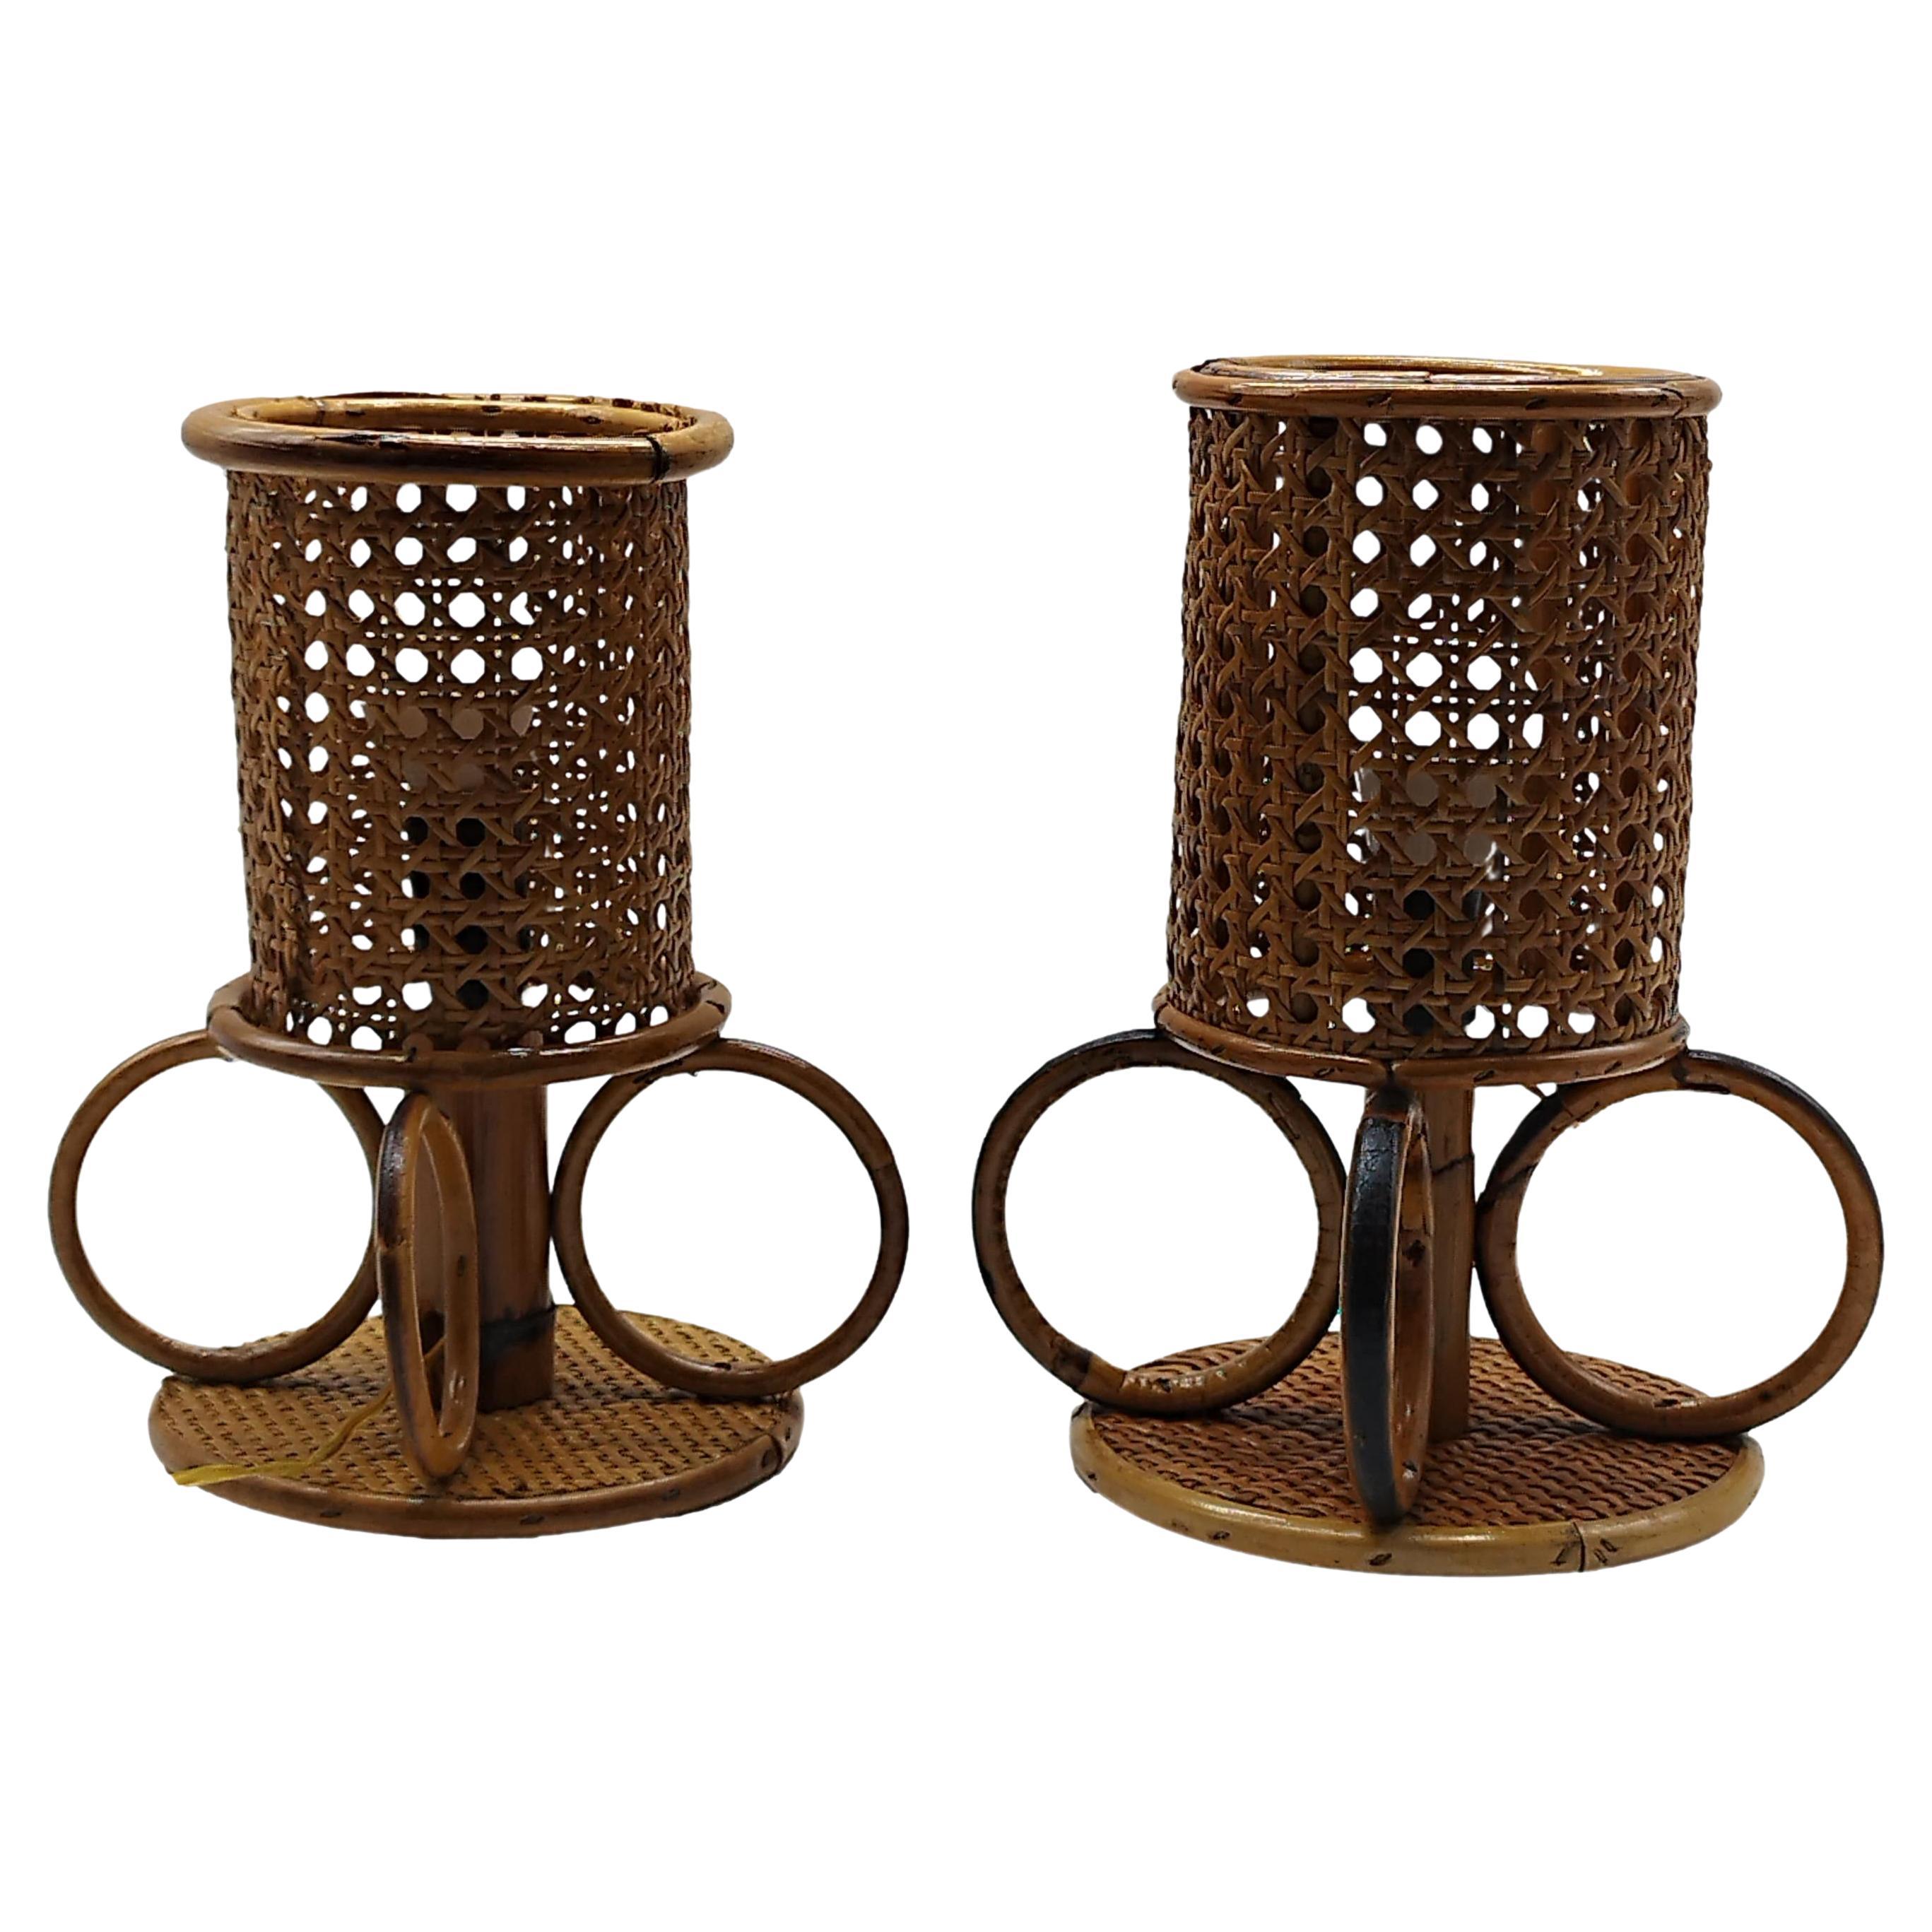 Pair of Bamboo and Rattan Table Lamps, Italy 1960s